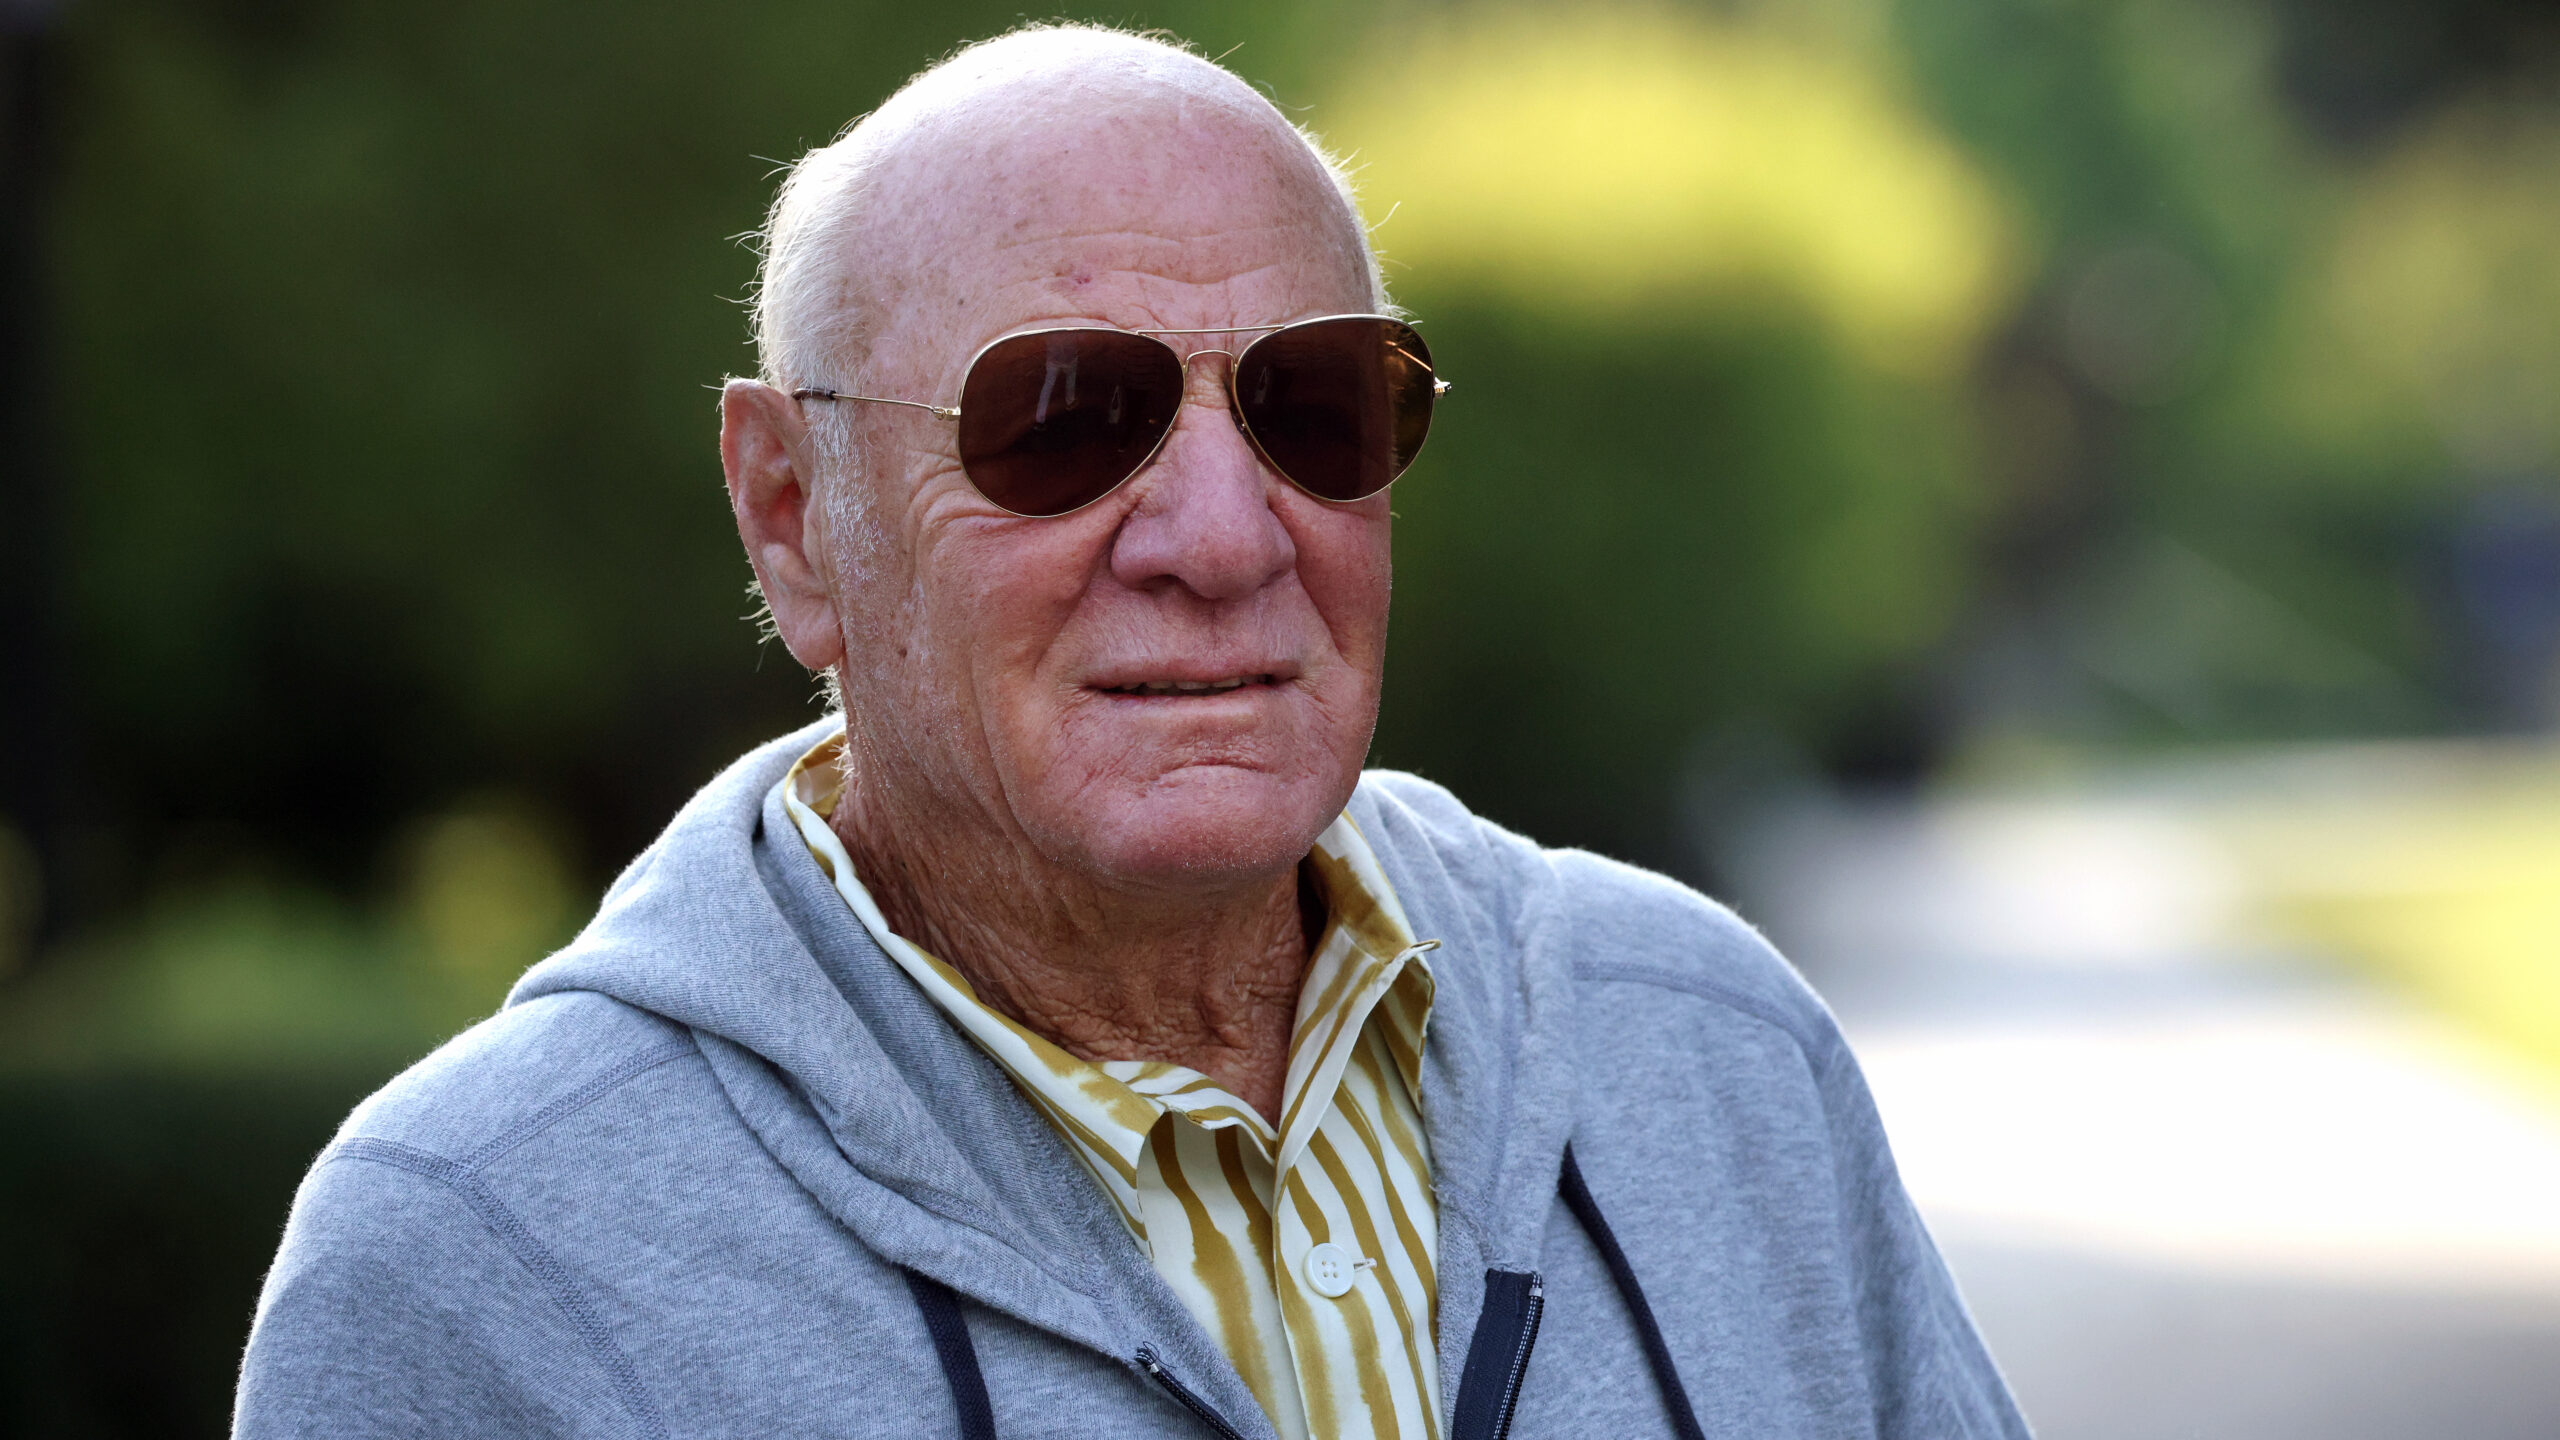 Barry diller headed hollywood studios he now says the movie business is dead